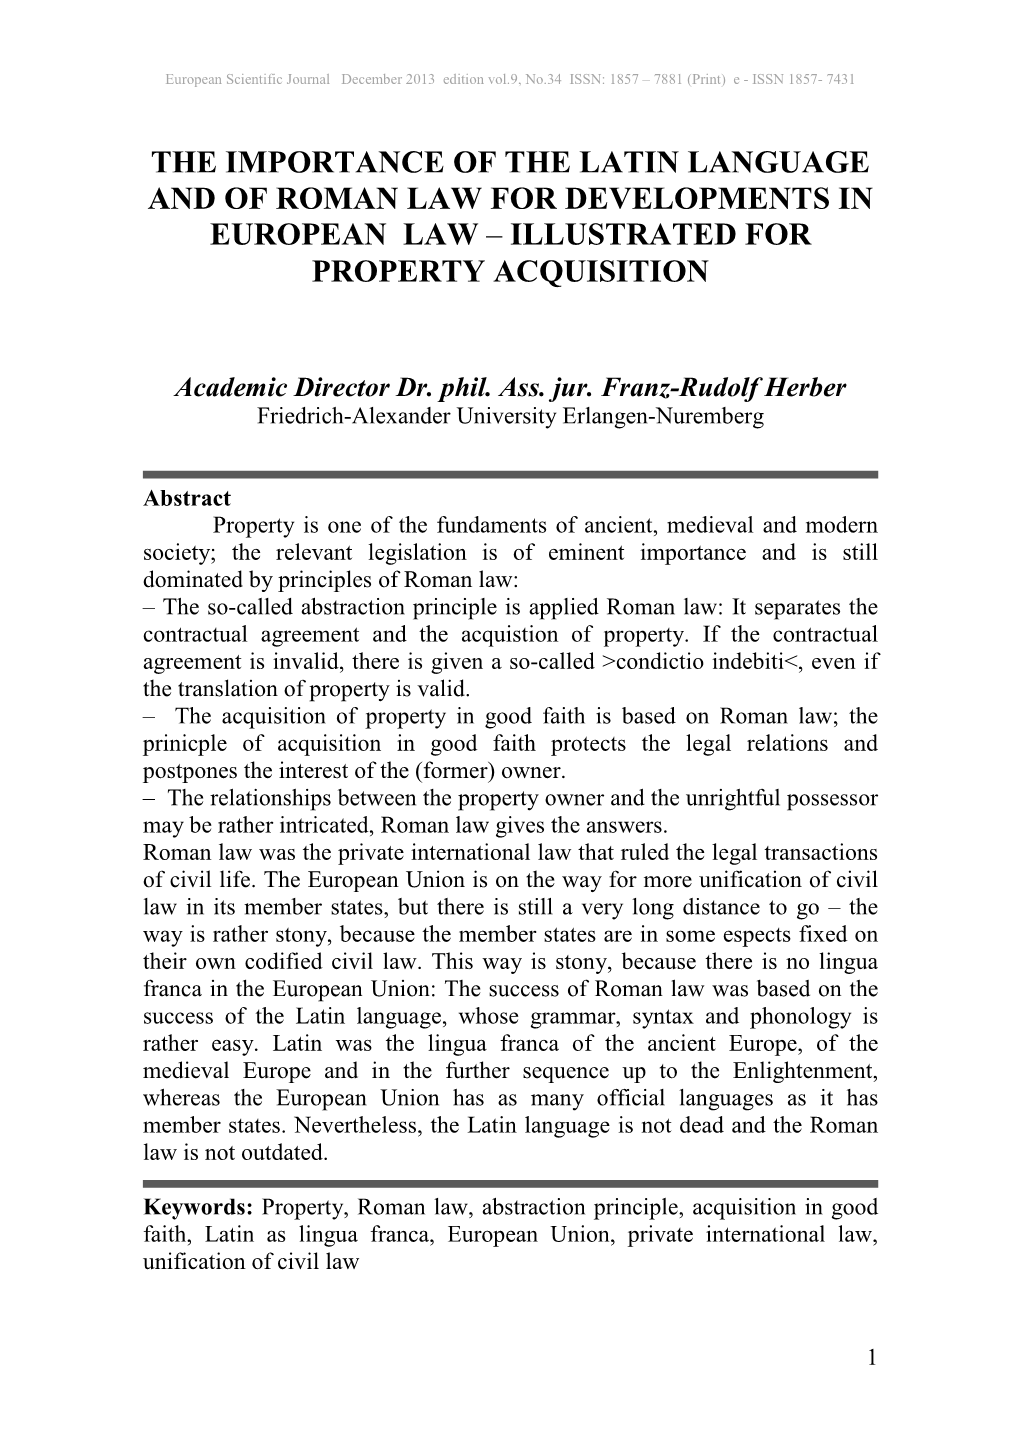 The Importance of the Latin Language and of Roman Law for Developments in European Law – Illustrated for Property Acquisition